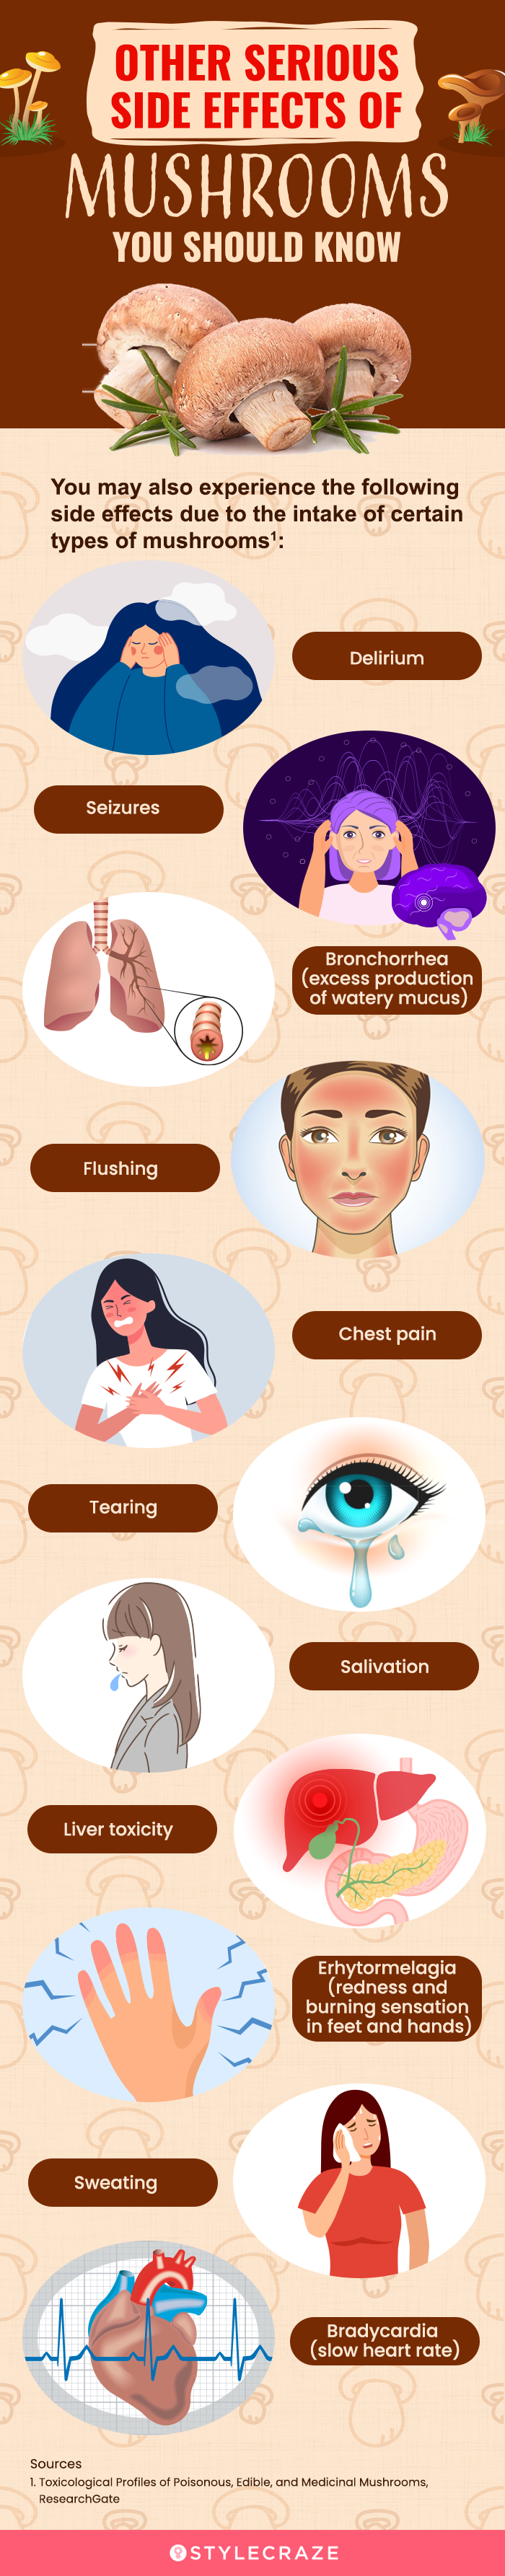 other serious side effects of mushrooms you should know (infographic)